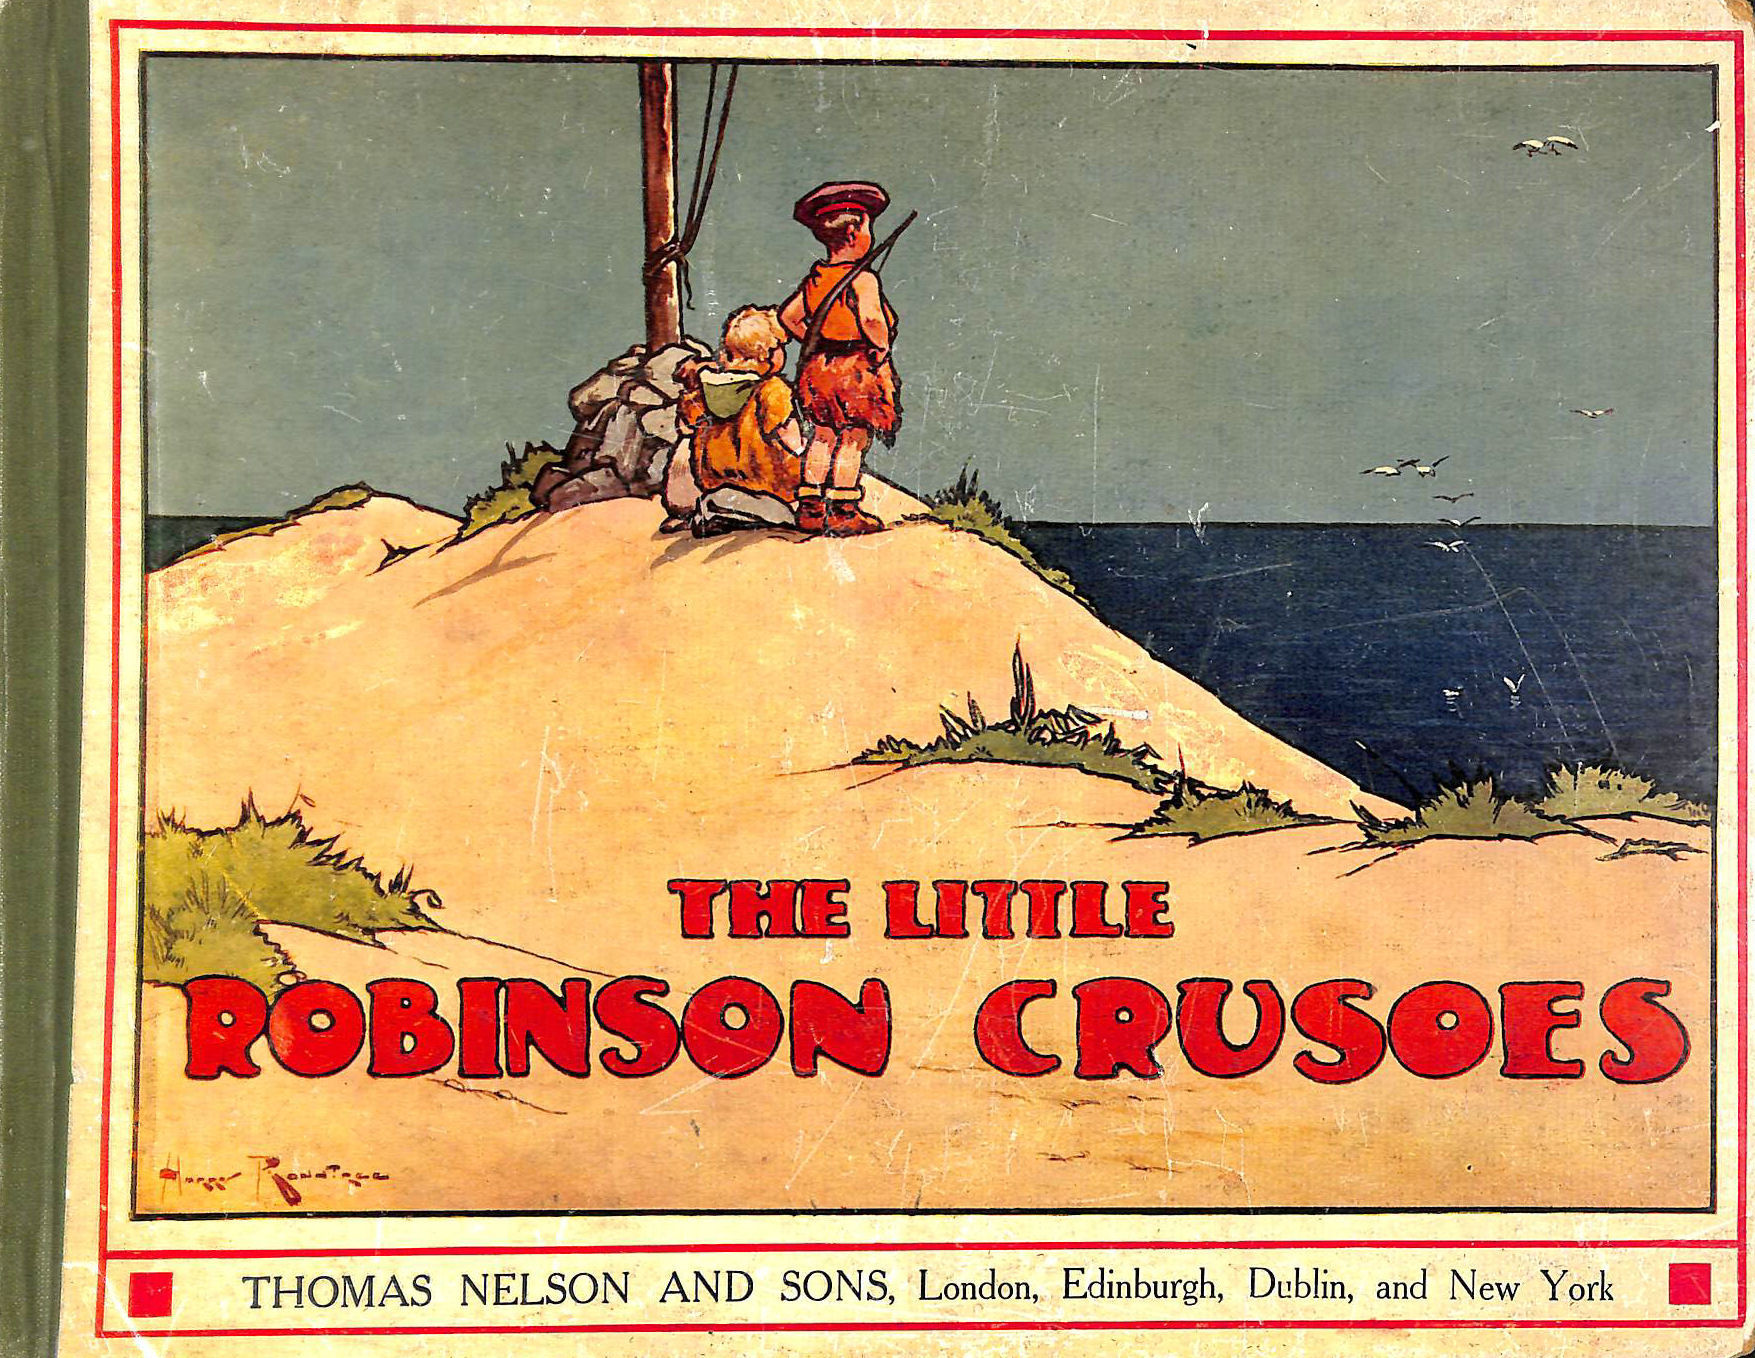 HAROLD AVERY - The Little Robinson Crusoes